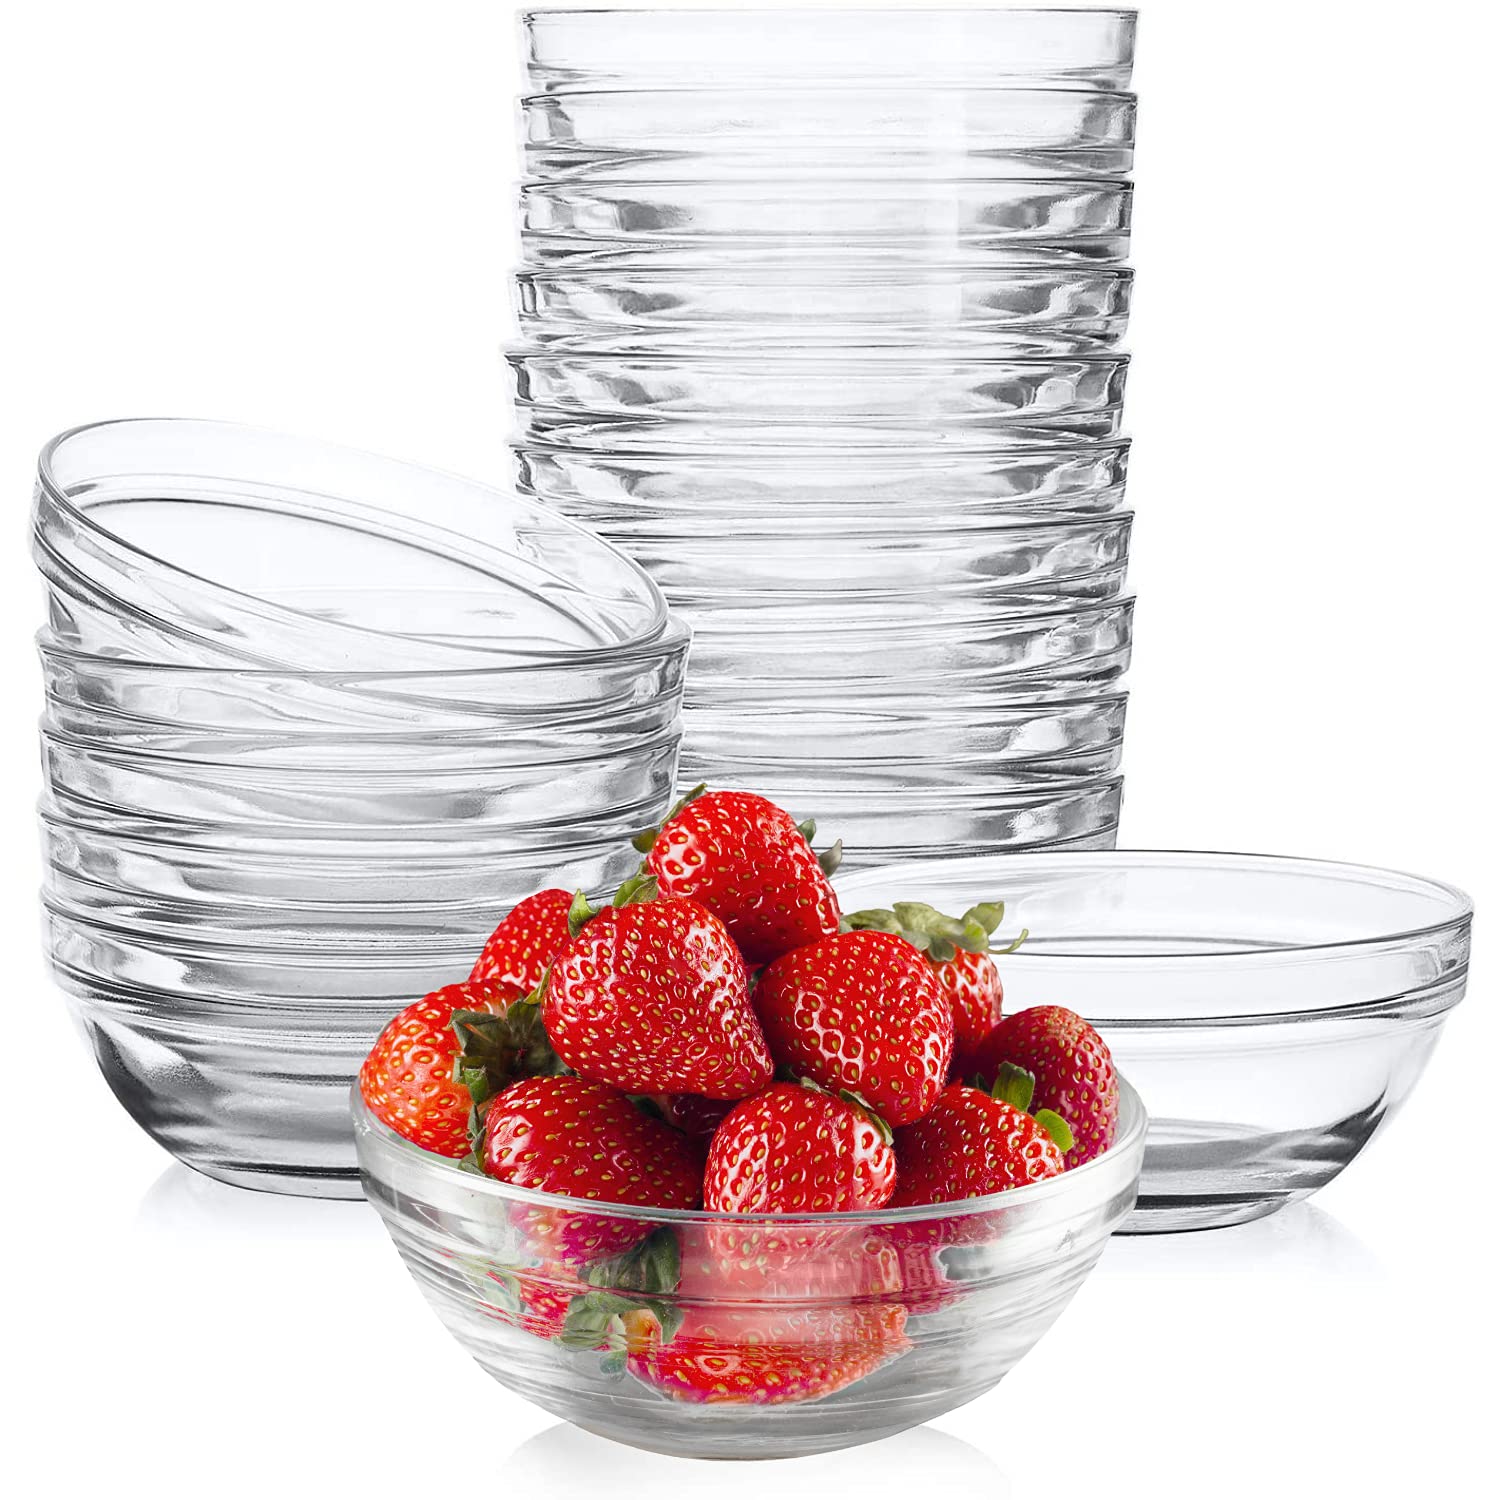 6pcs Glass Pudding Bowls Jelly Cups Small Clear Glass Bowls Dessert  Containers Kitchen Mini Prep Bowls 